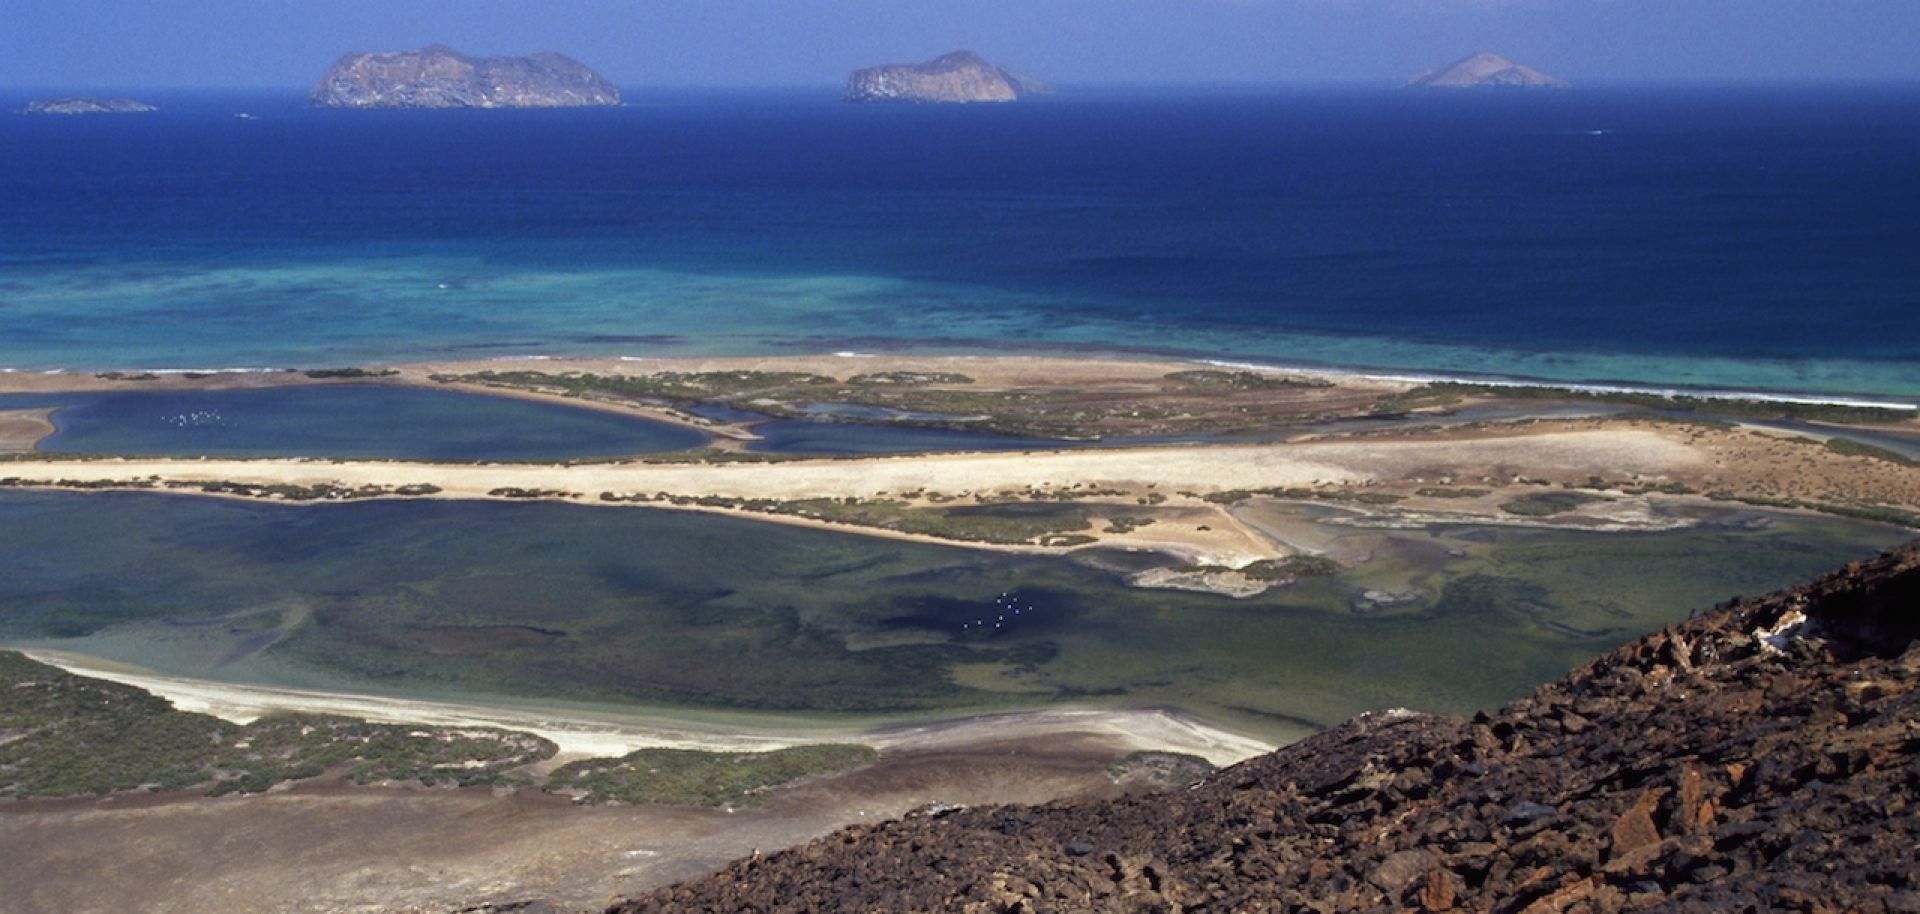 The Red Sea forms the background of this photo taken from the island of Saba in the Al-Zubair archipelago off the coast of Yemen